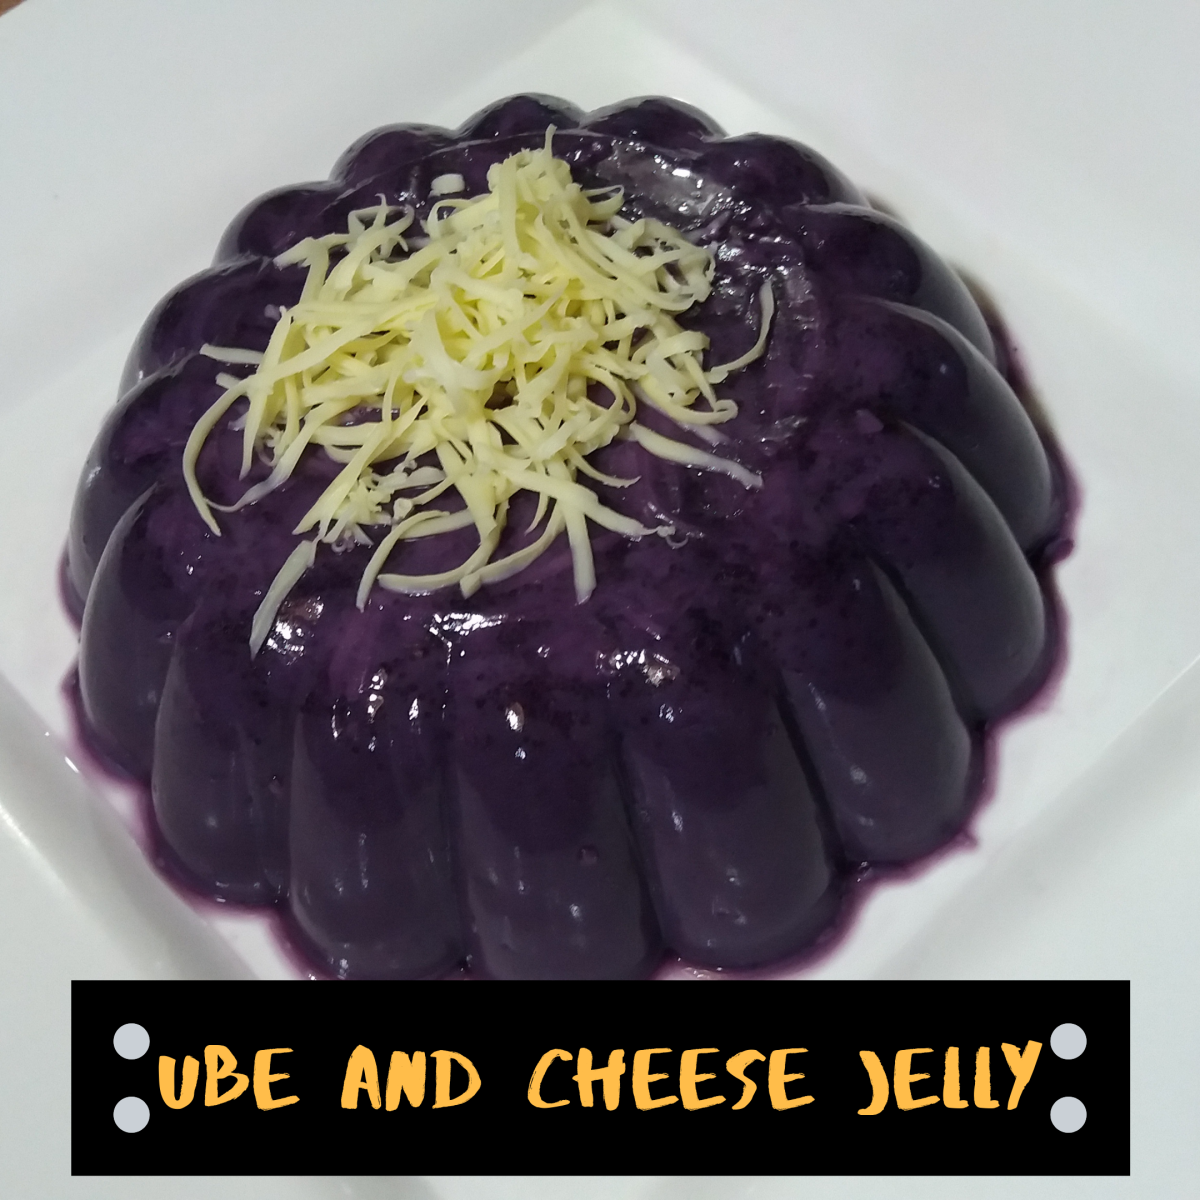 How to Cook Ube and Cheese Jelly